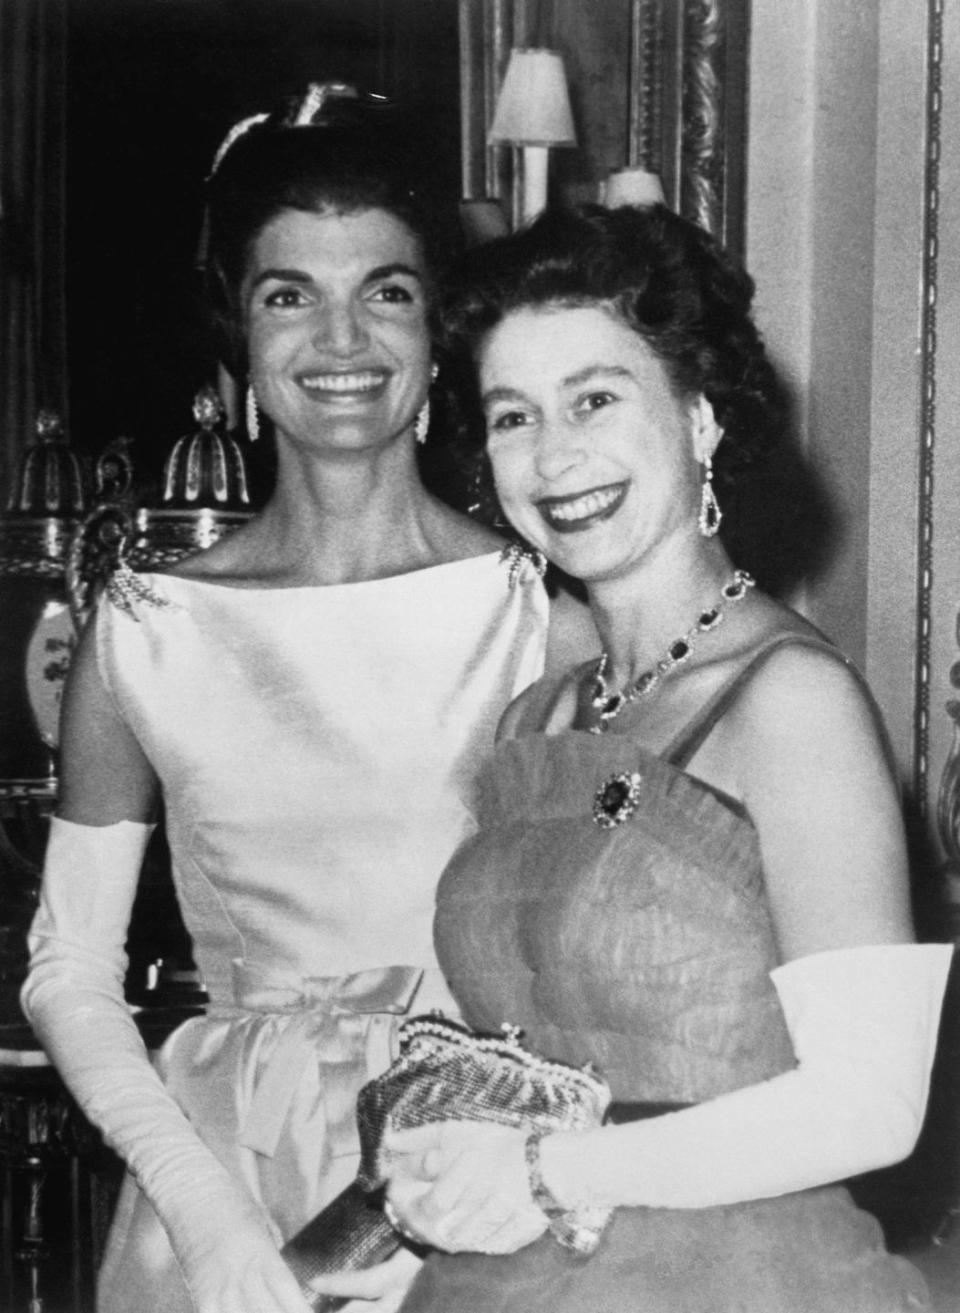 <p>Queen Elizabeth poses with Jackie Kennedy, the First Lady of the United States at the time, during a dinner at Buckingham Palace. It was the first time the president of the United States had been invited to dine at Buckingham Palace since 1918.</p>